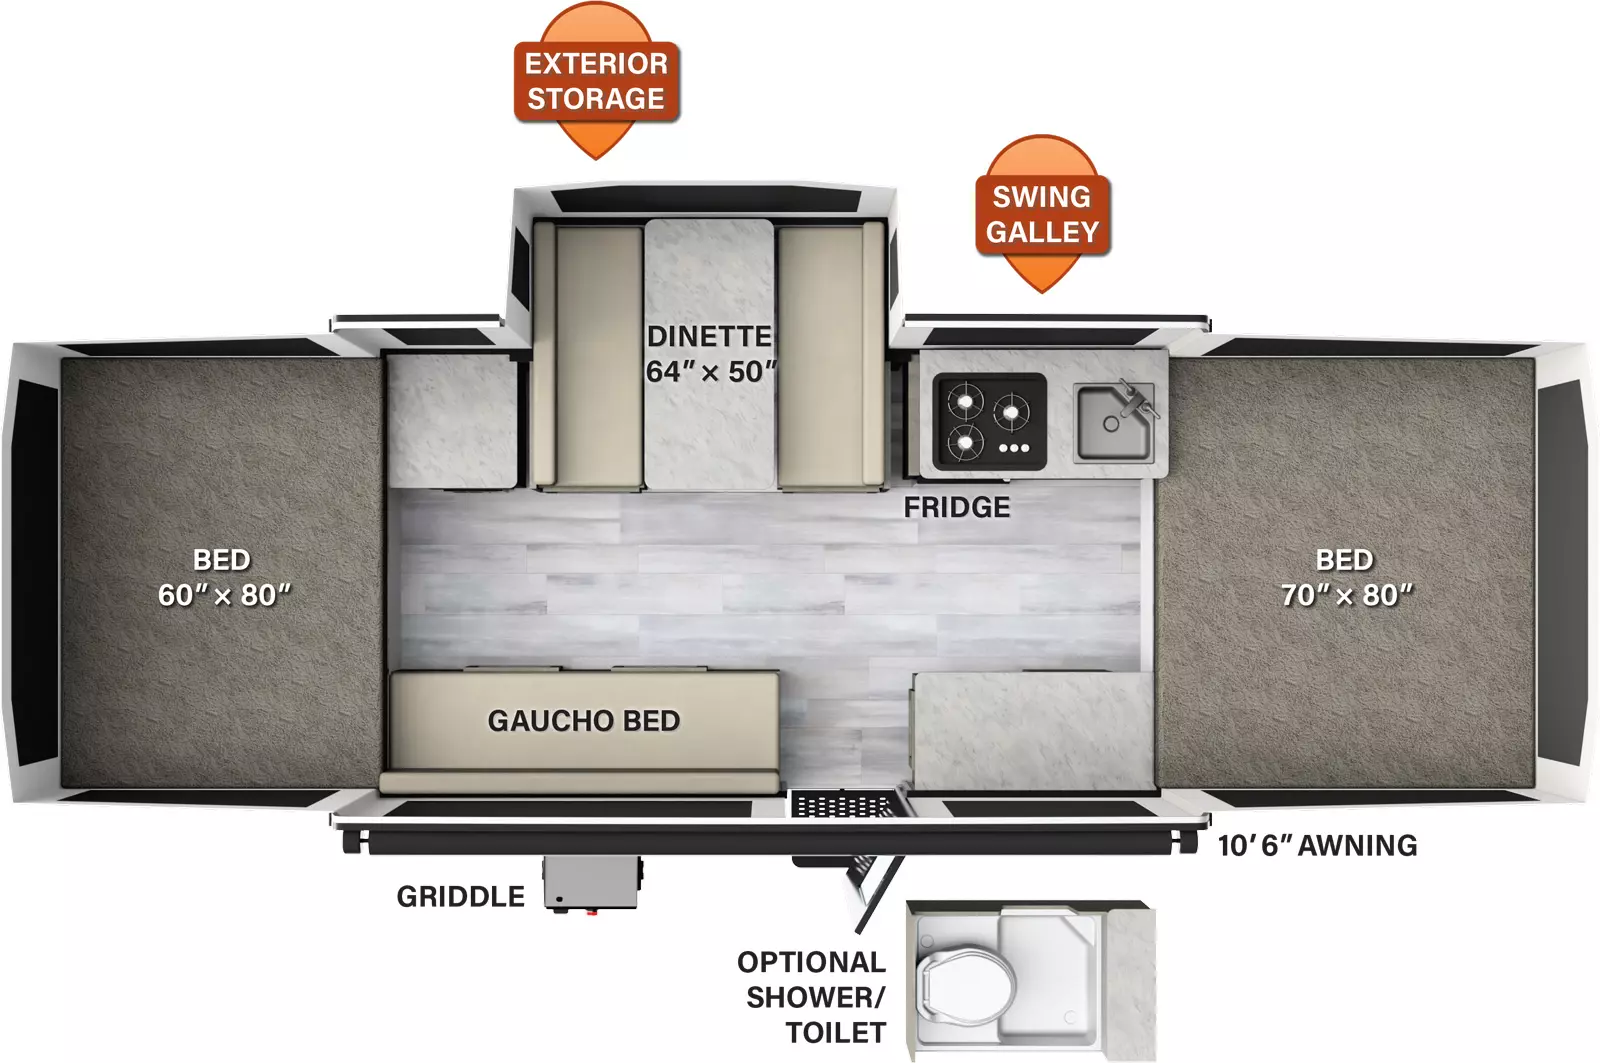 The 228D has one slide out on the off-door side and one entry door. Exterior features include a 10 foot 6 inch awning, griddle, and exterior storage. Interior layout from front to back: front tent bed; off-door side swing galley with refrigerator, cooktop and sink, dinette slideout, and cabinet; door side cabinet and gaucho bed; rear tent bed. Optional shower/toilet available.